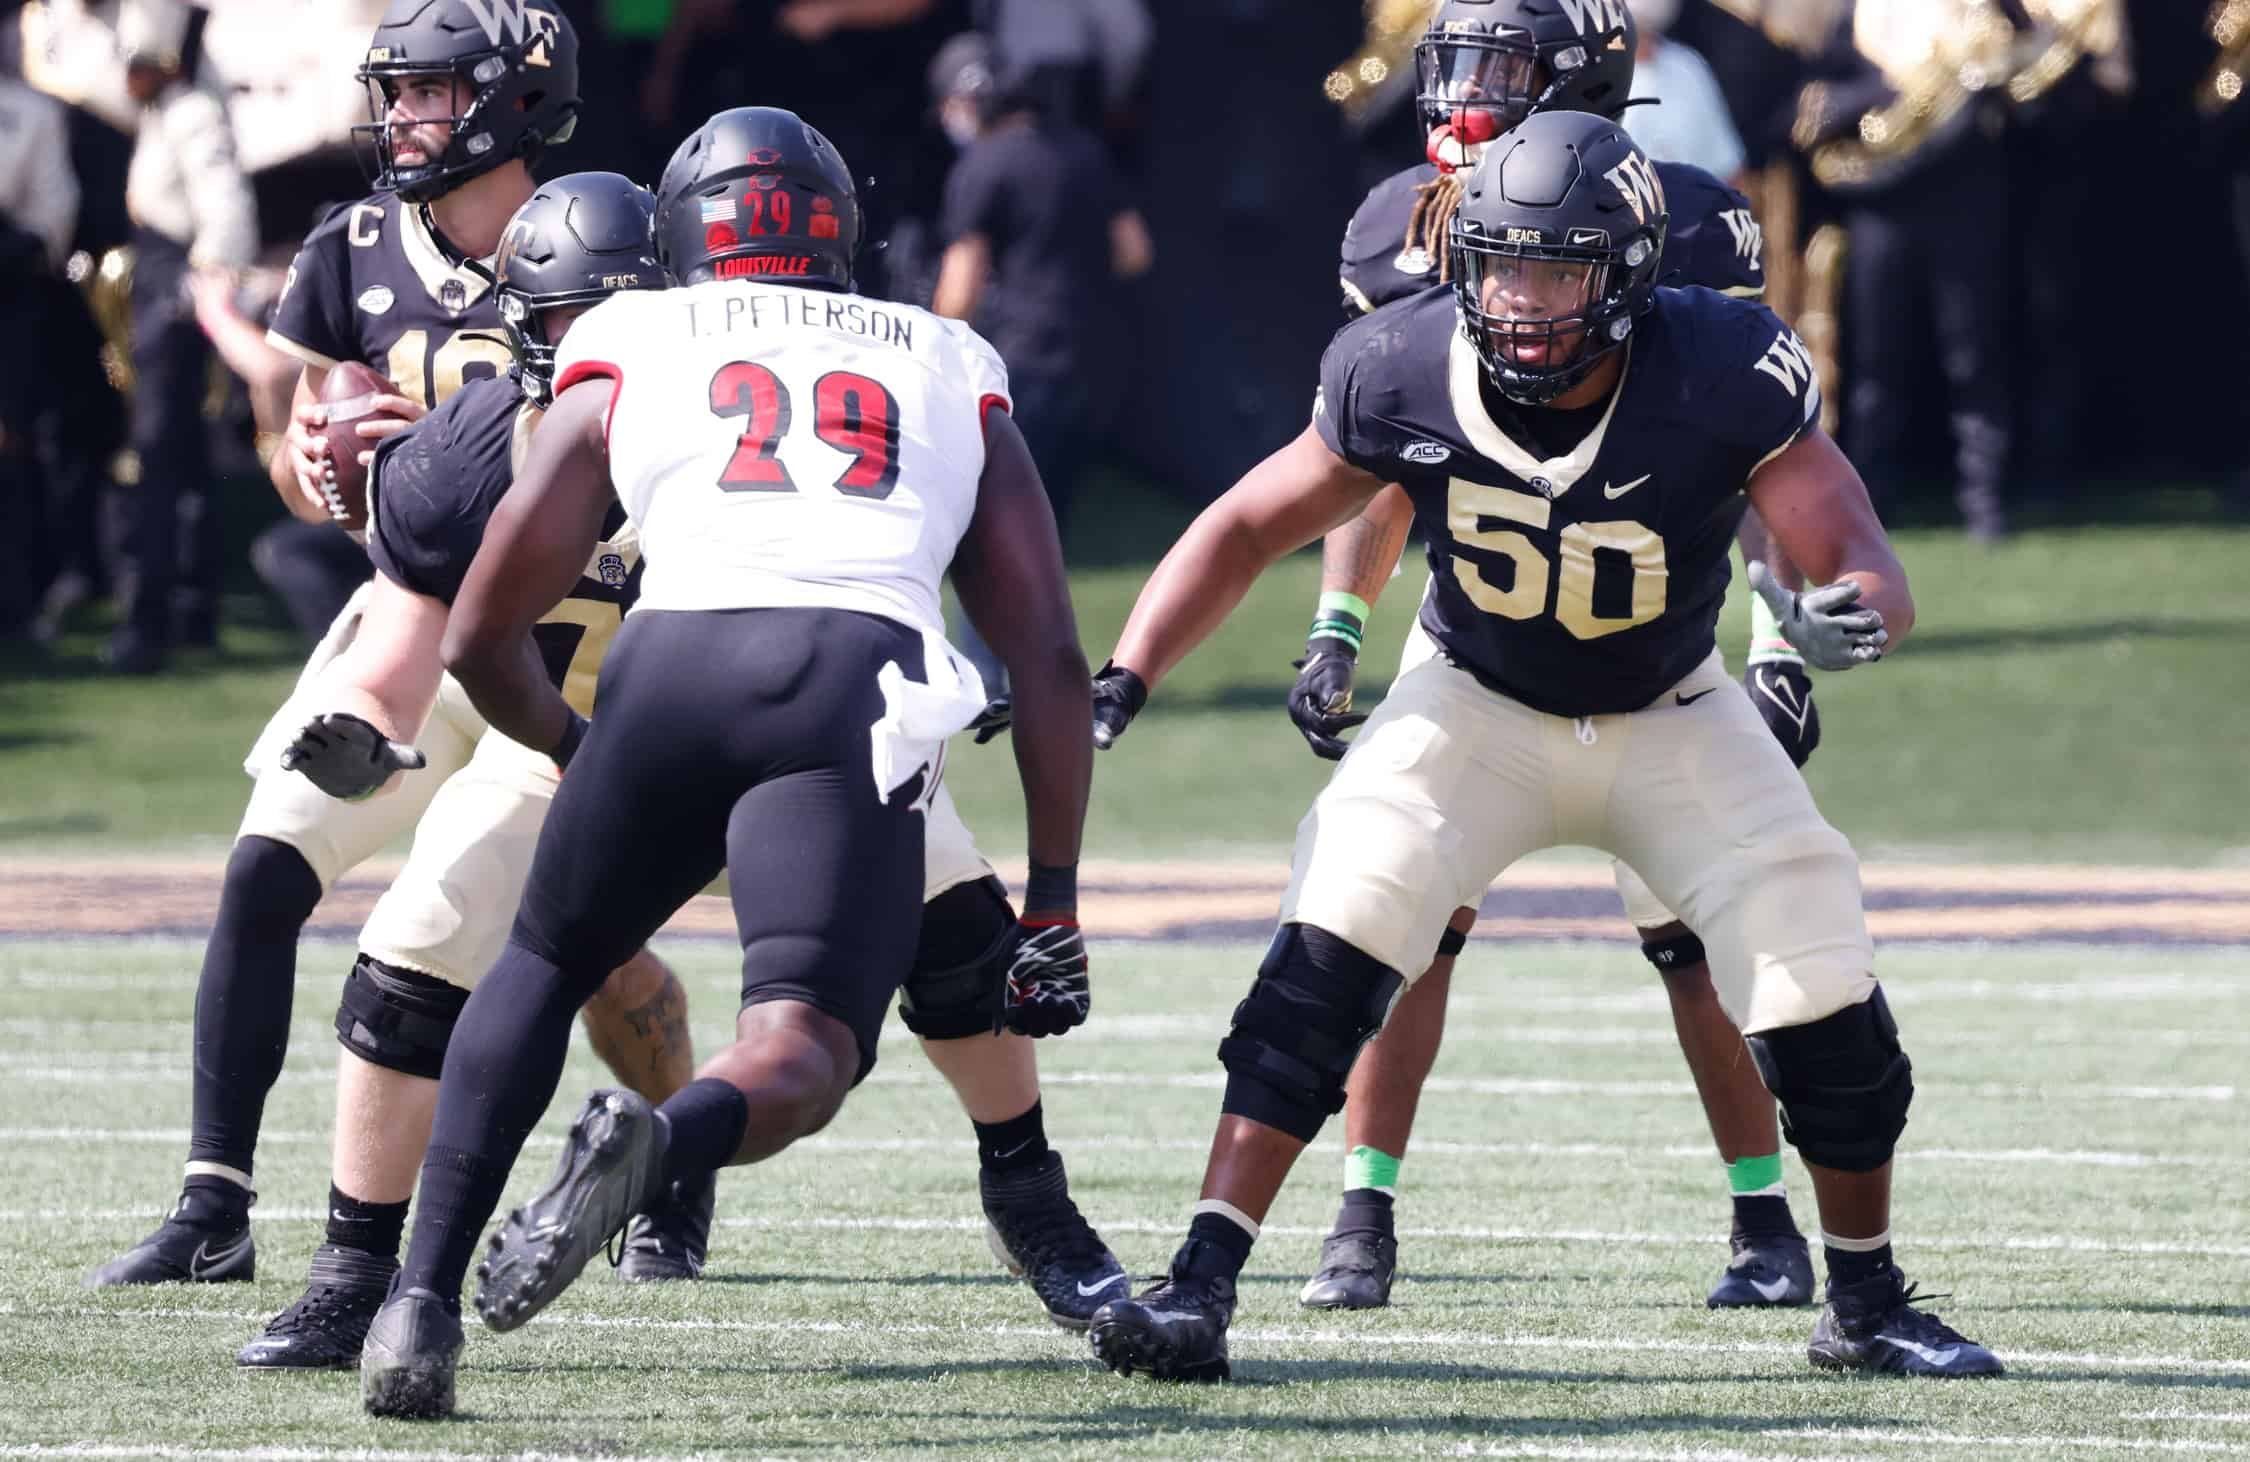 Wake Forest 2022 NFL Draft Scouting Reports include Zach Tom